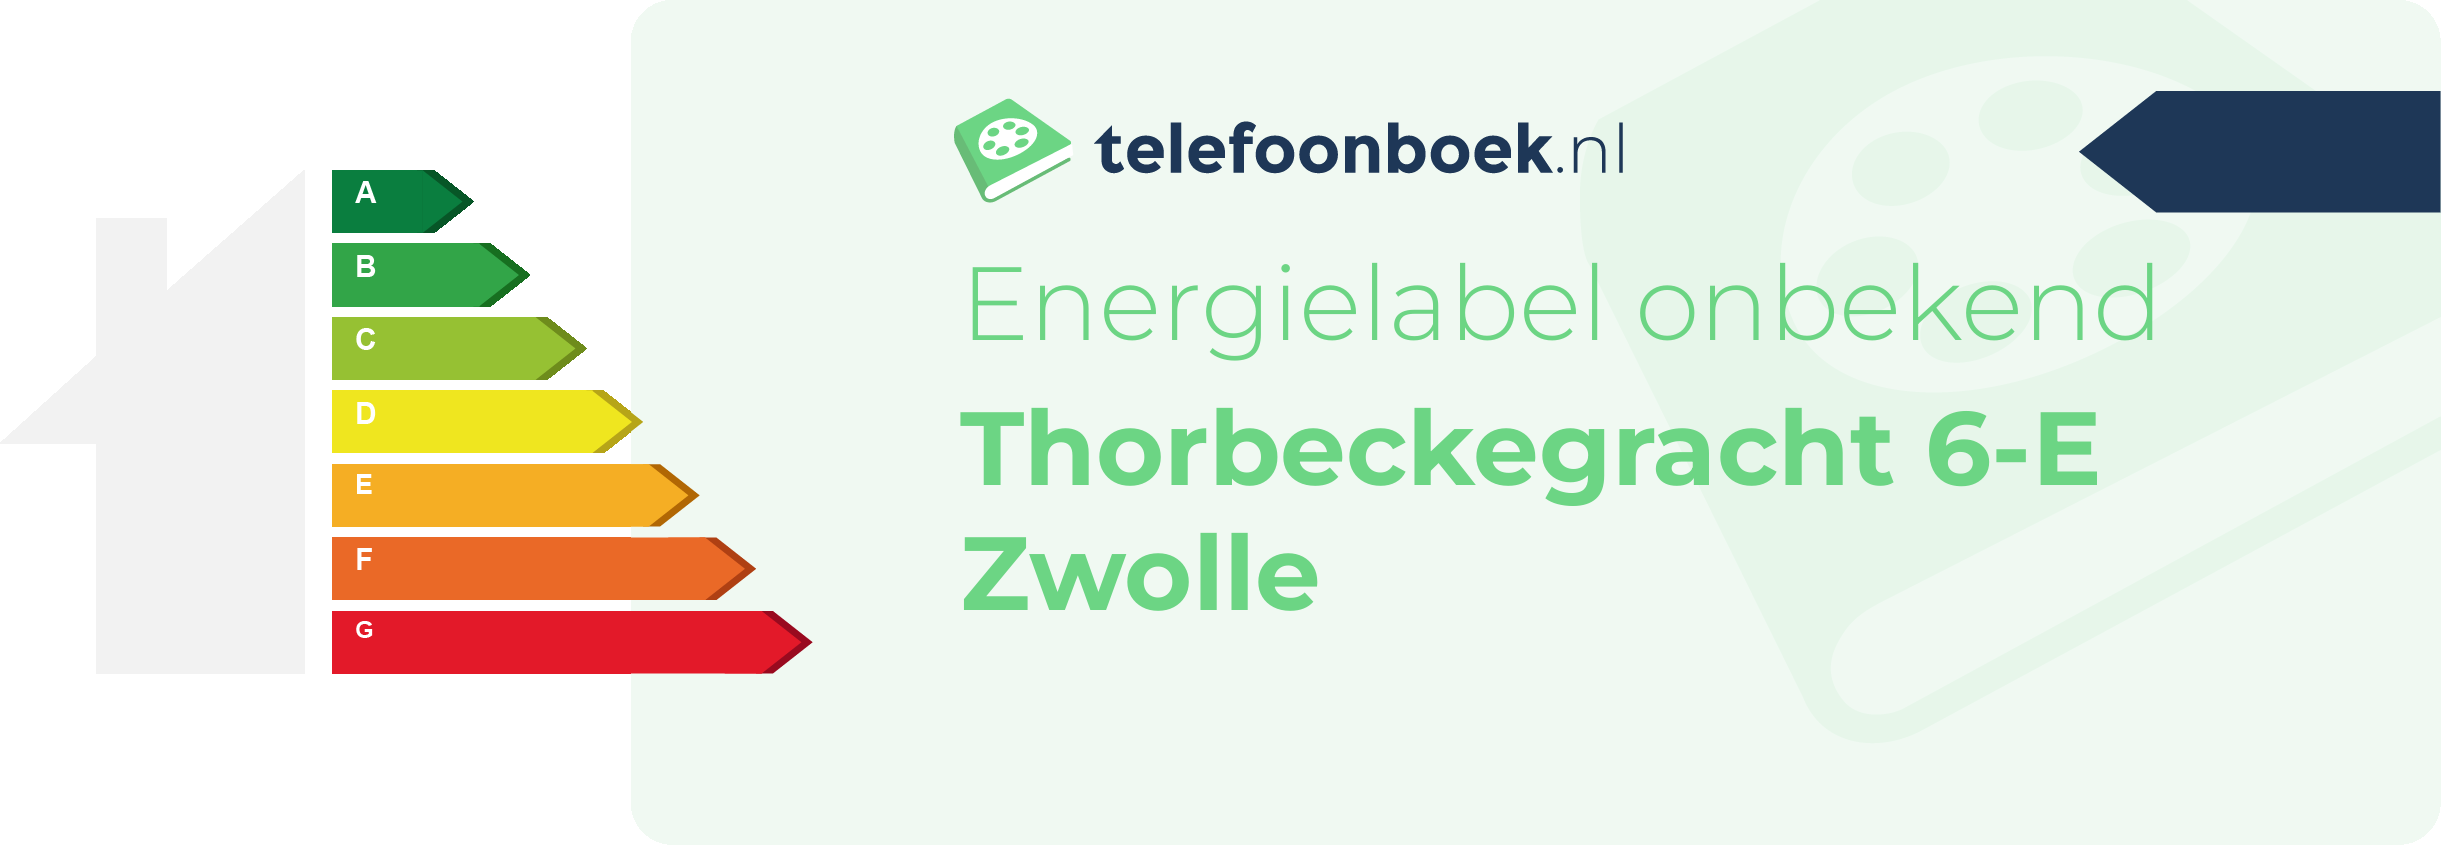 Energielabel Thorbeckegracht 6-E Zwolle